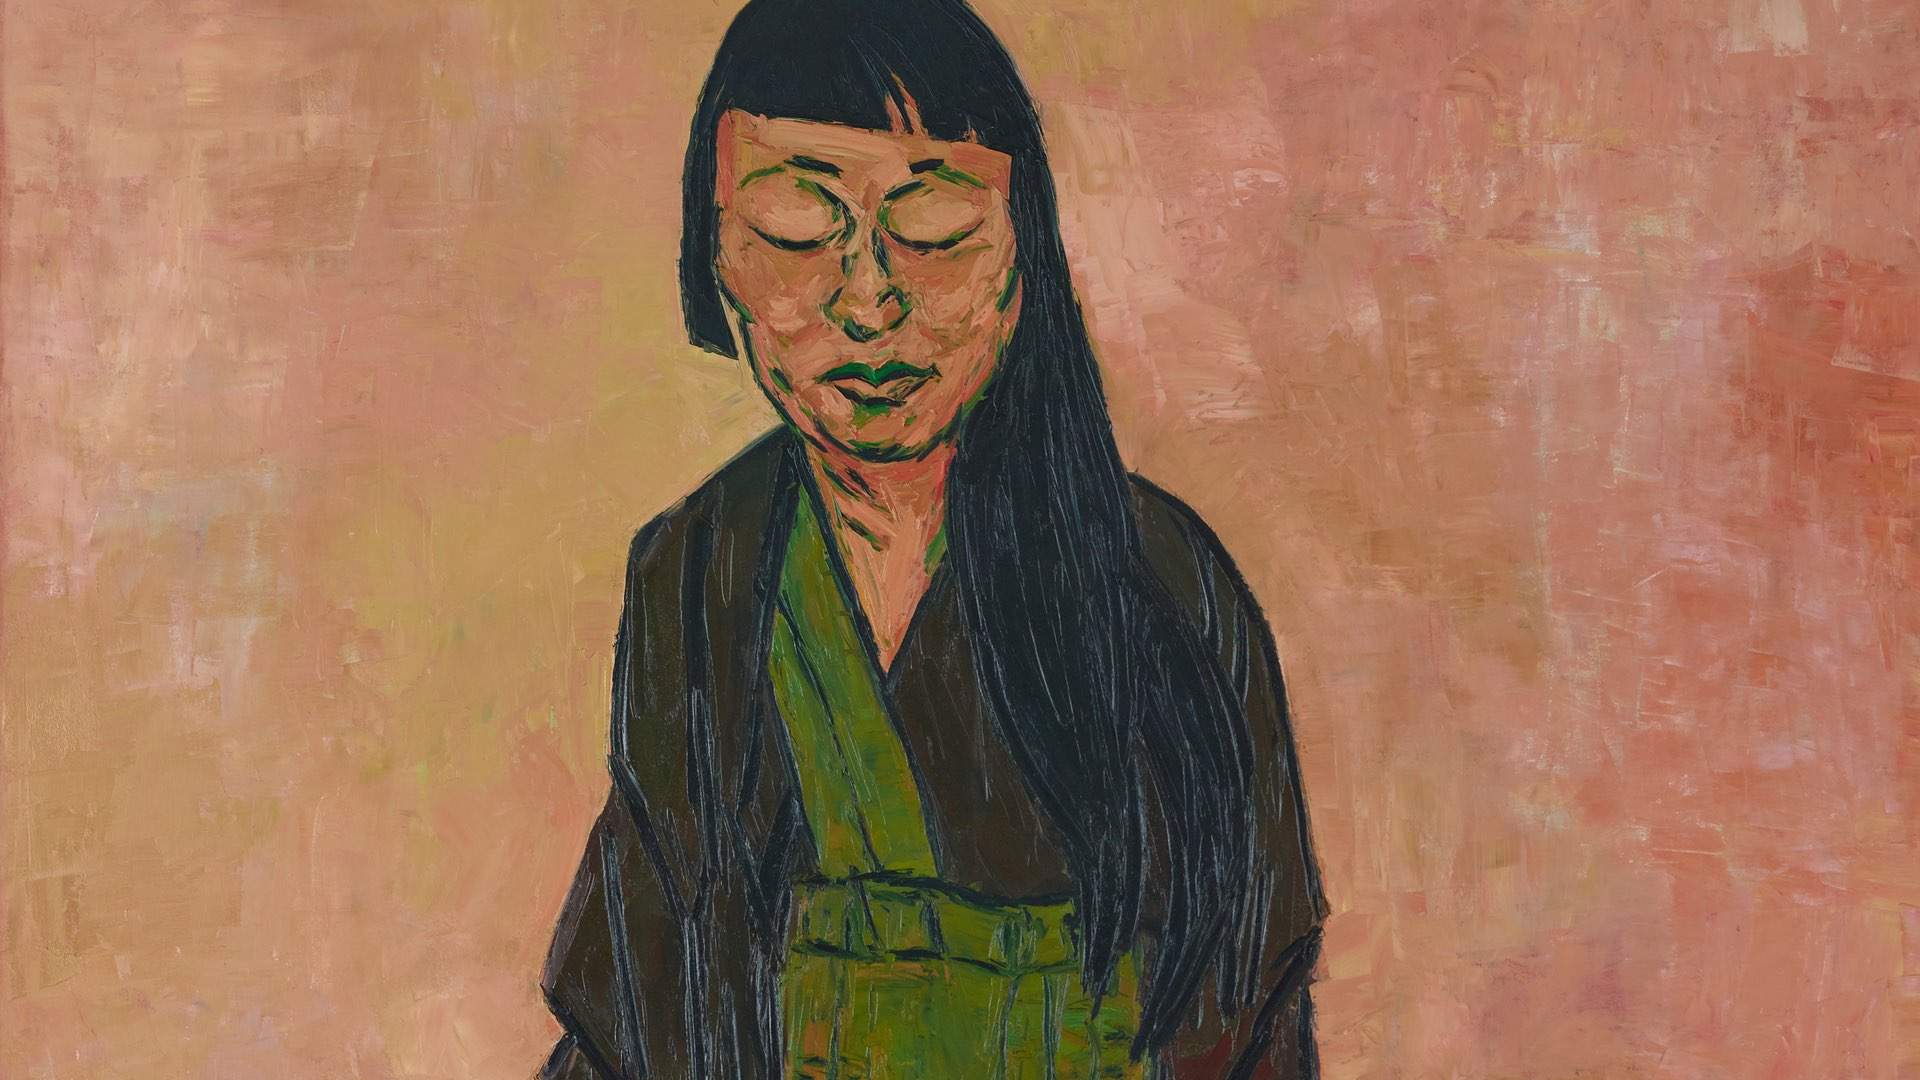 Tony Costa's Portrait of Fellow Artist Lindy Lee Has Just Taken Out the 2019 Archibald Prize